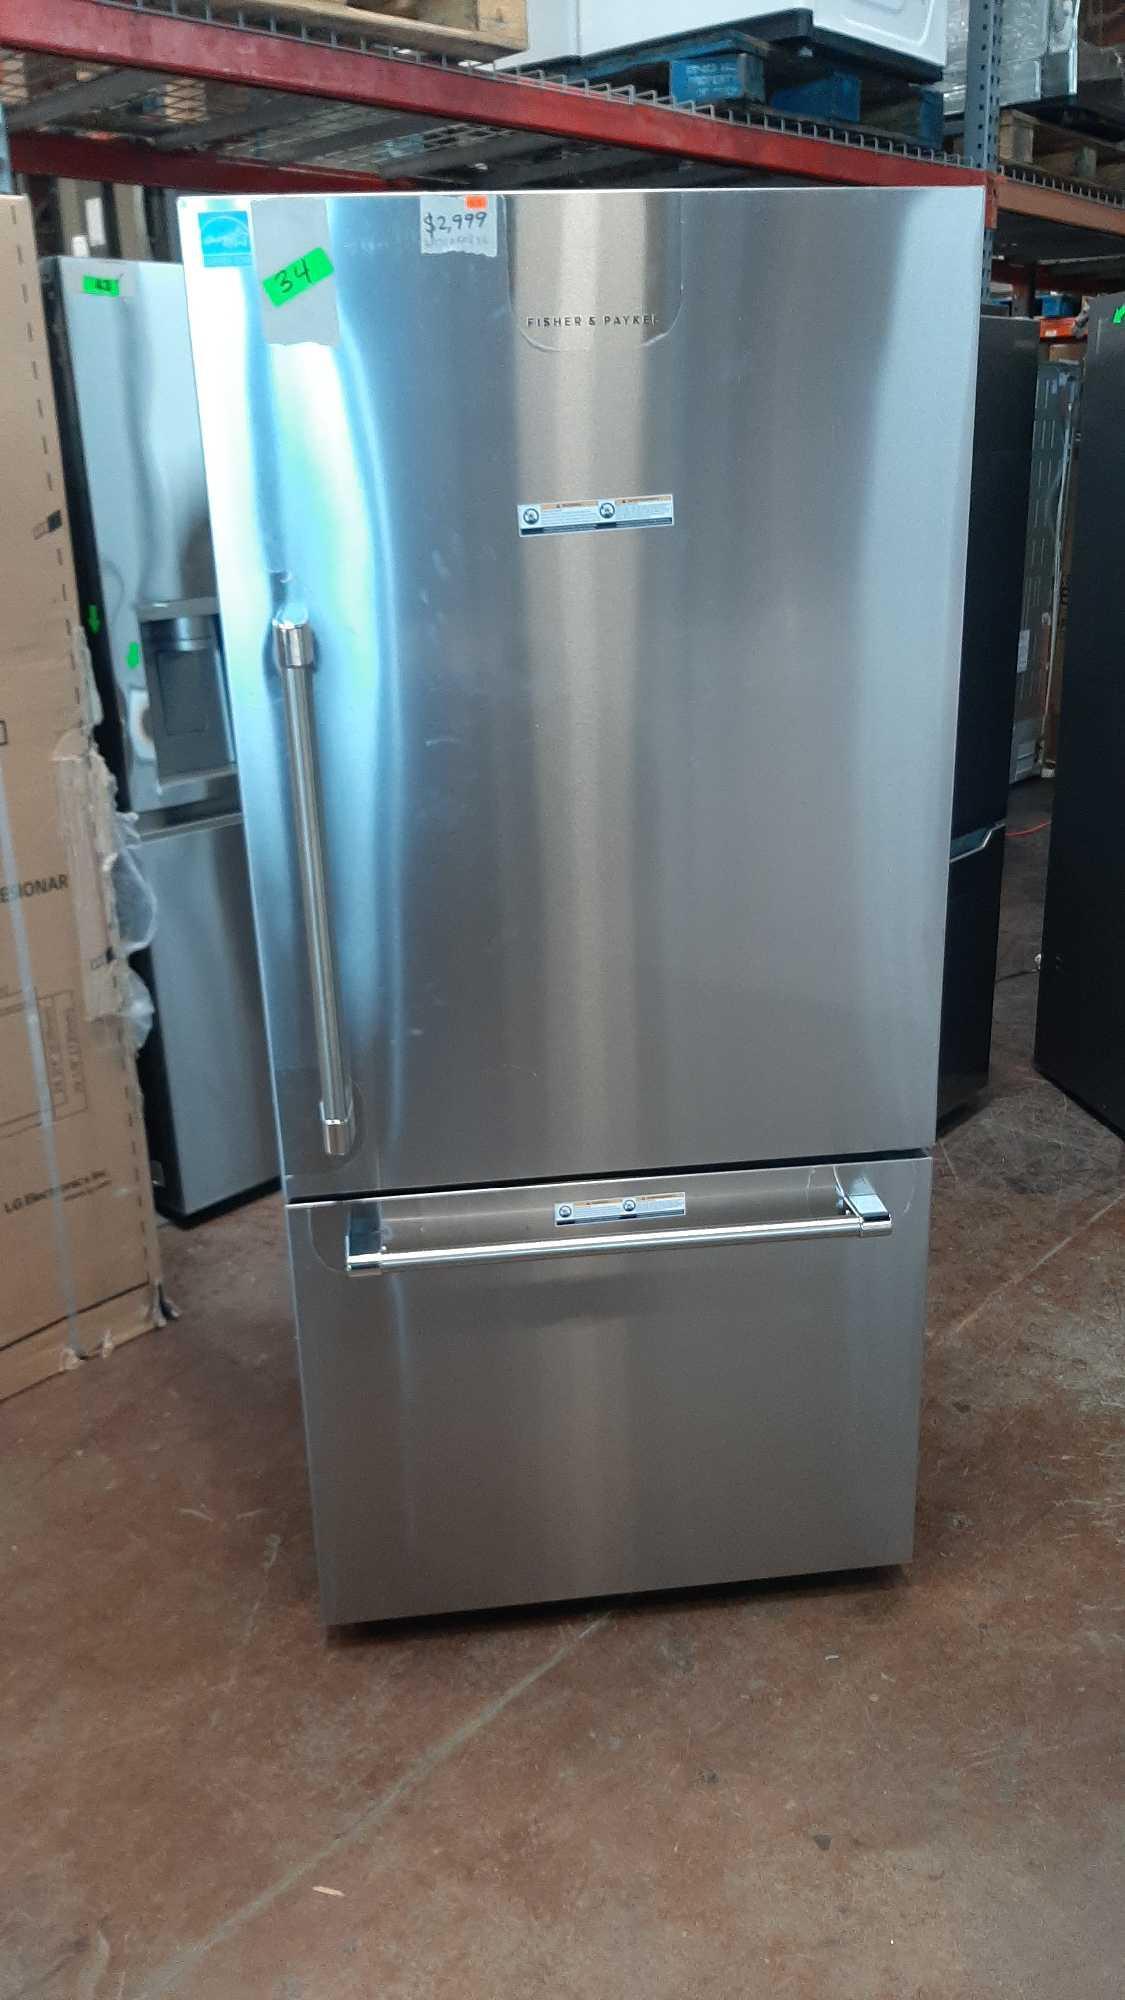 Fisher & Paykel 32in Freestanding Bottom Mount 17.1 Cu. Ft. Refrigerator*COLD*